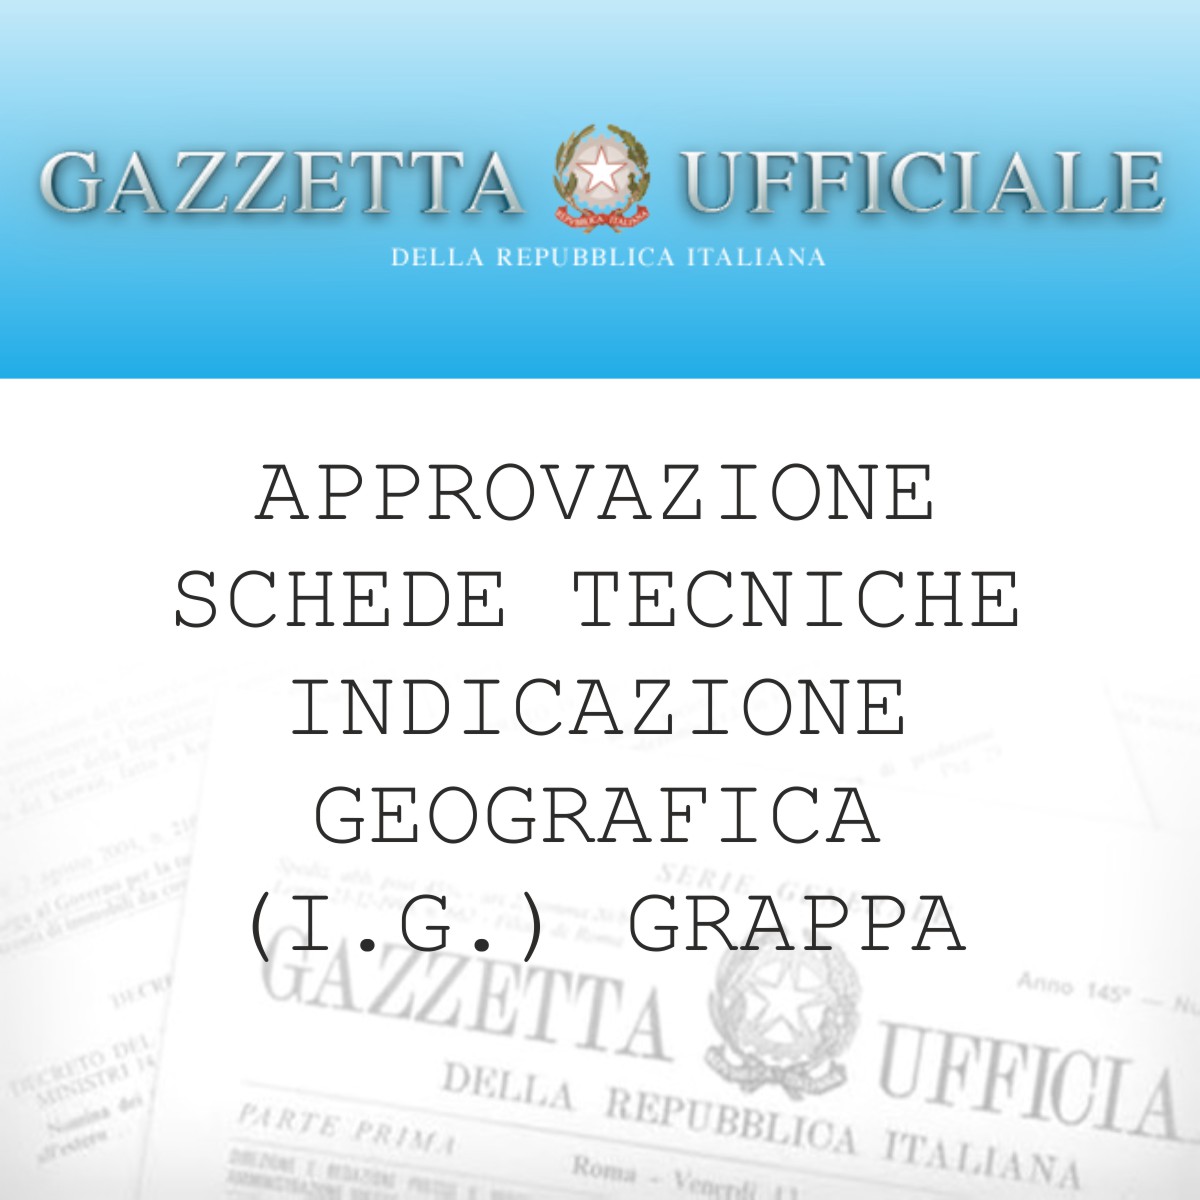 Application for registration of the Grappa Geographical Indications